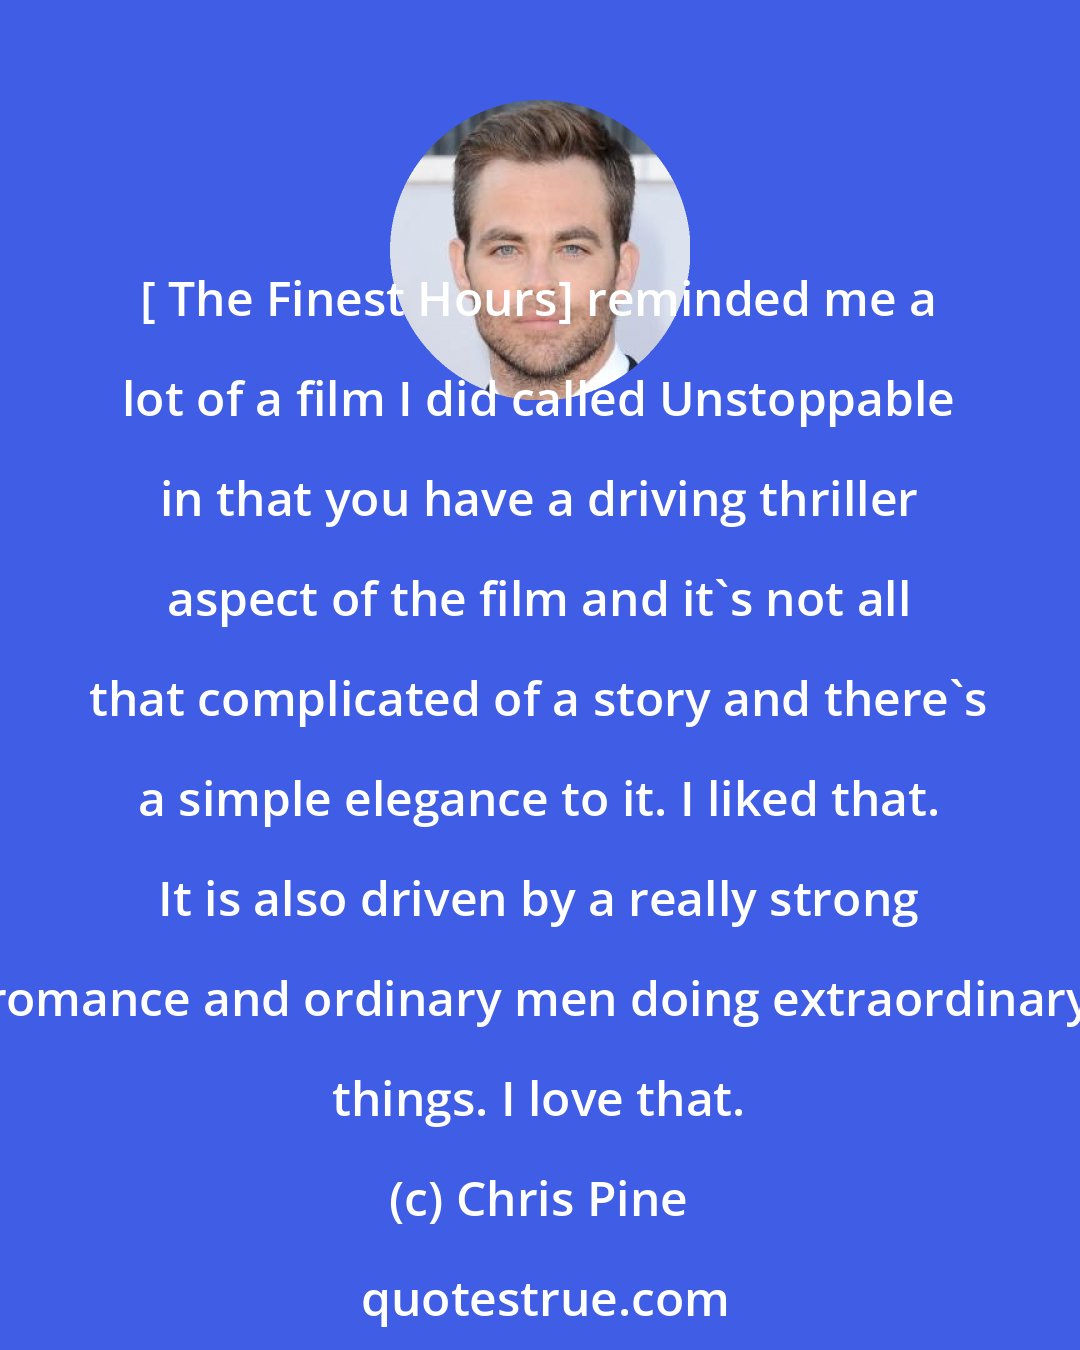 Chris Pine: [ The Finest Hours] reminded me a lot of a film I did called Unstoppable in that you have a driving thriller aspect of the film and it's not all that complicated of a story and there's a simple elegance to it. I liked that. It is also driven by a really strong romance and ordinary men doing extraordinary things. I love that.